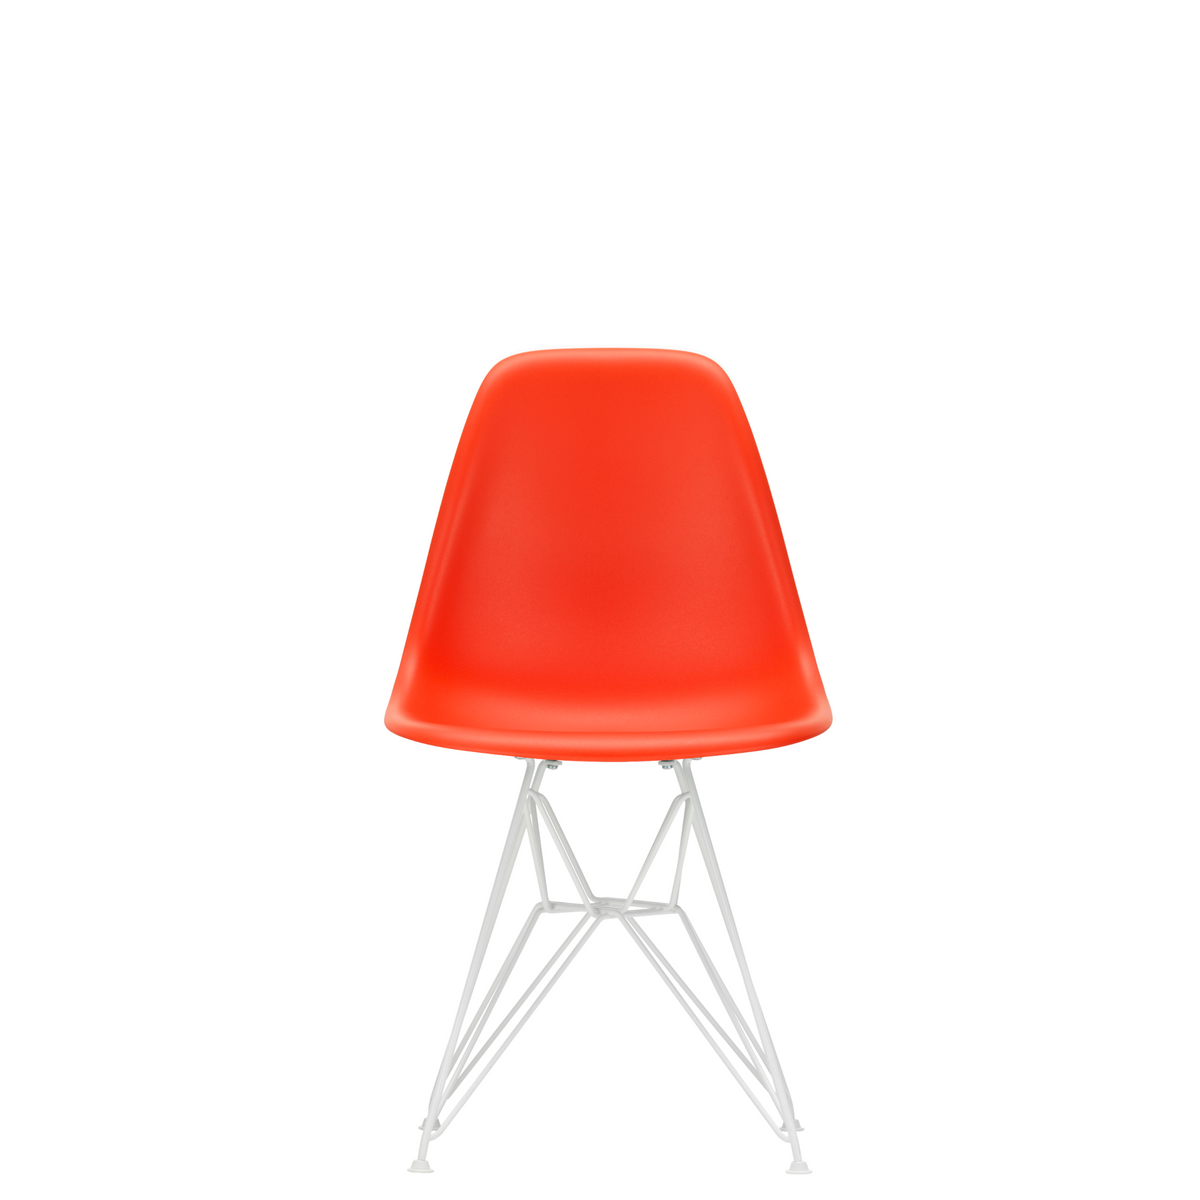 Vitra Eames Plastic Side Chair DSR Powder Coated for Outdoor Use Poppy Red Shell White Powdercoated Base